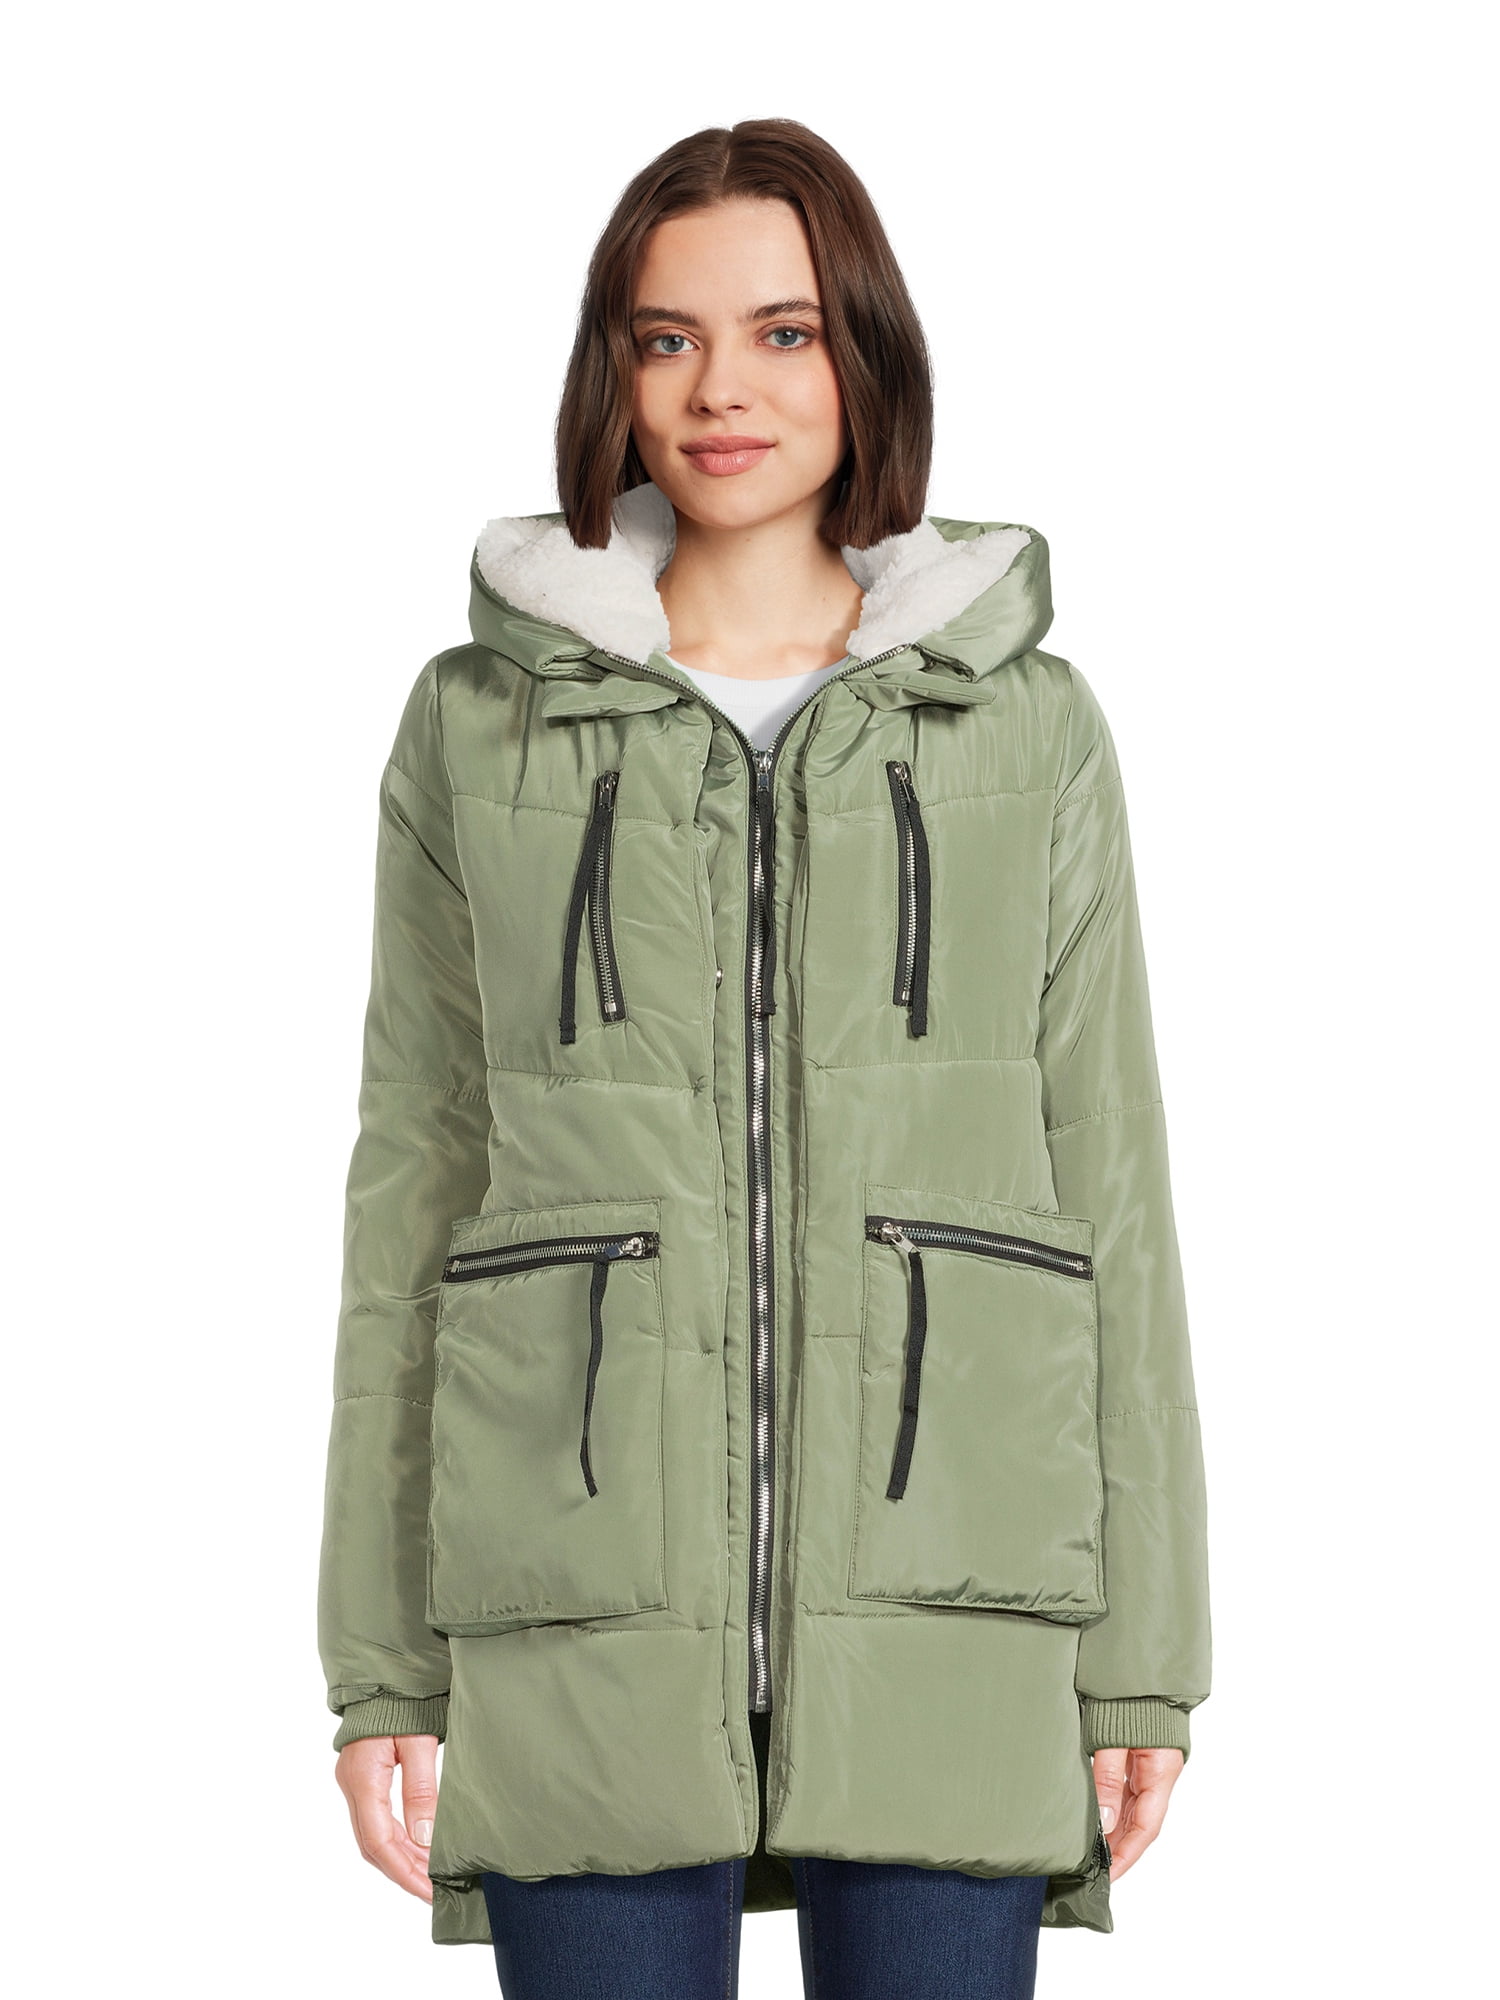 Jason Maxwell Women's Puffer Coat with Faux Shearling Lined Hood, Sizes ...